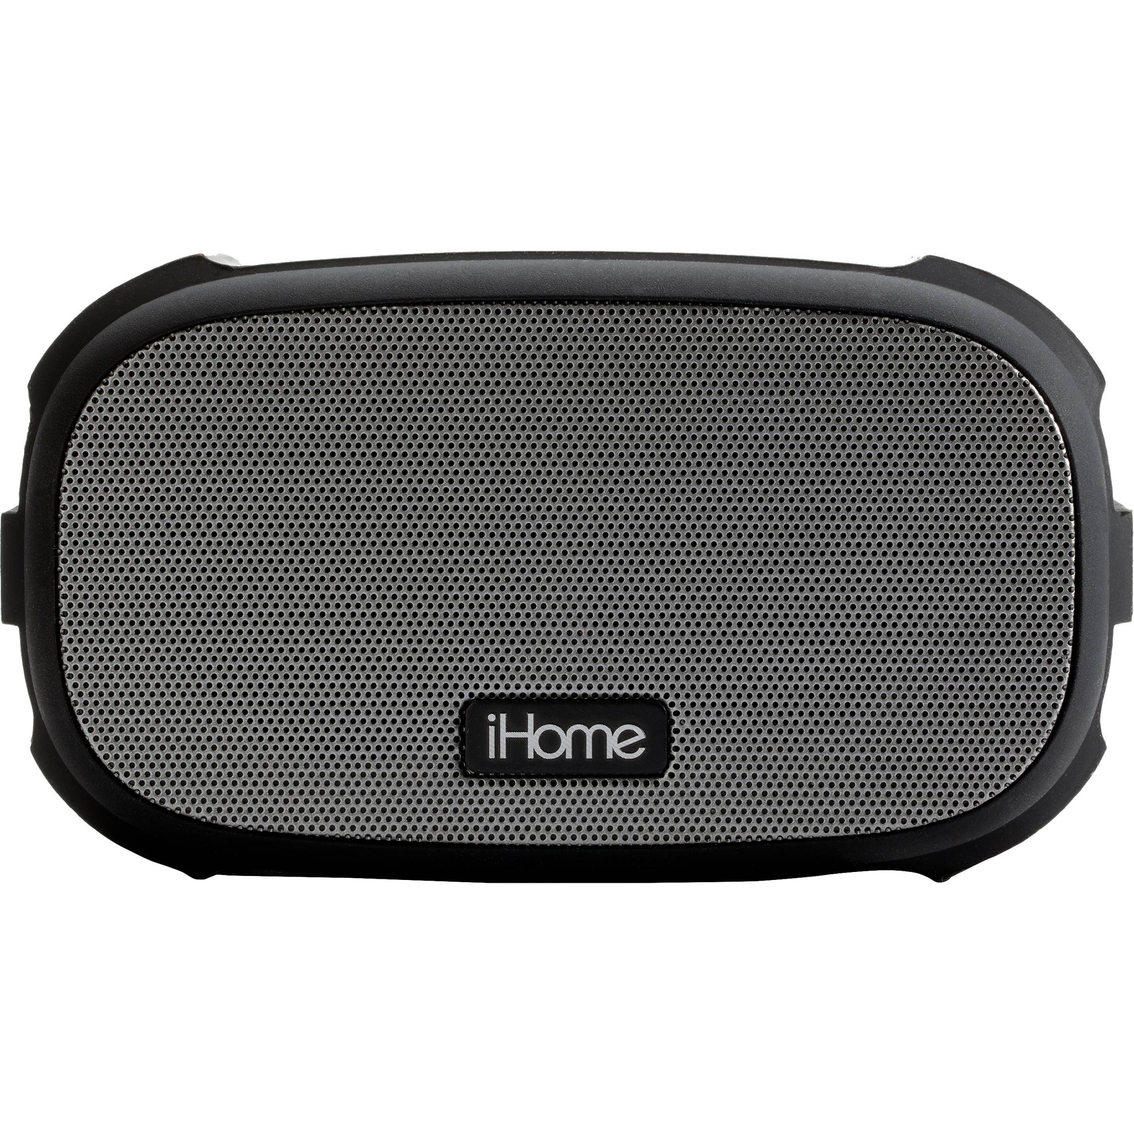 iHome PlayTough X Water and Shock Resistant Bluetooth Speaker - Image 2 of 7